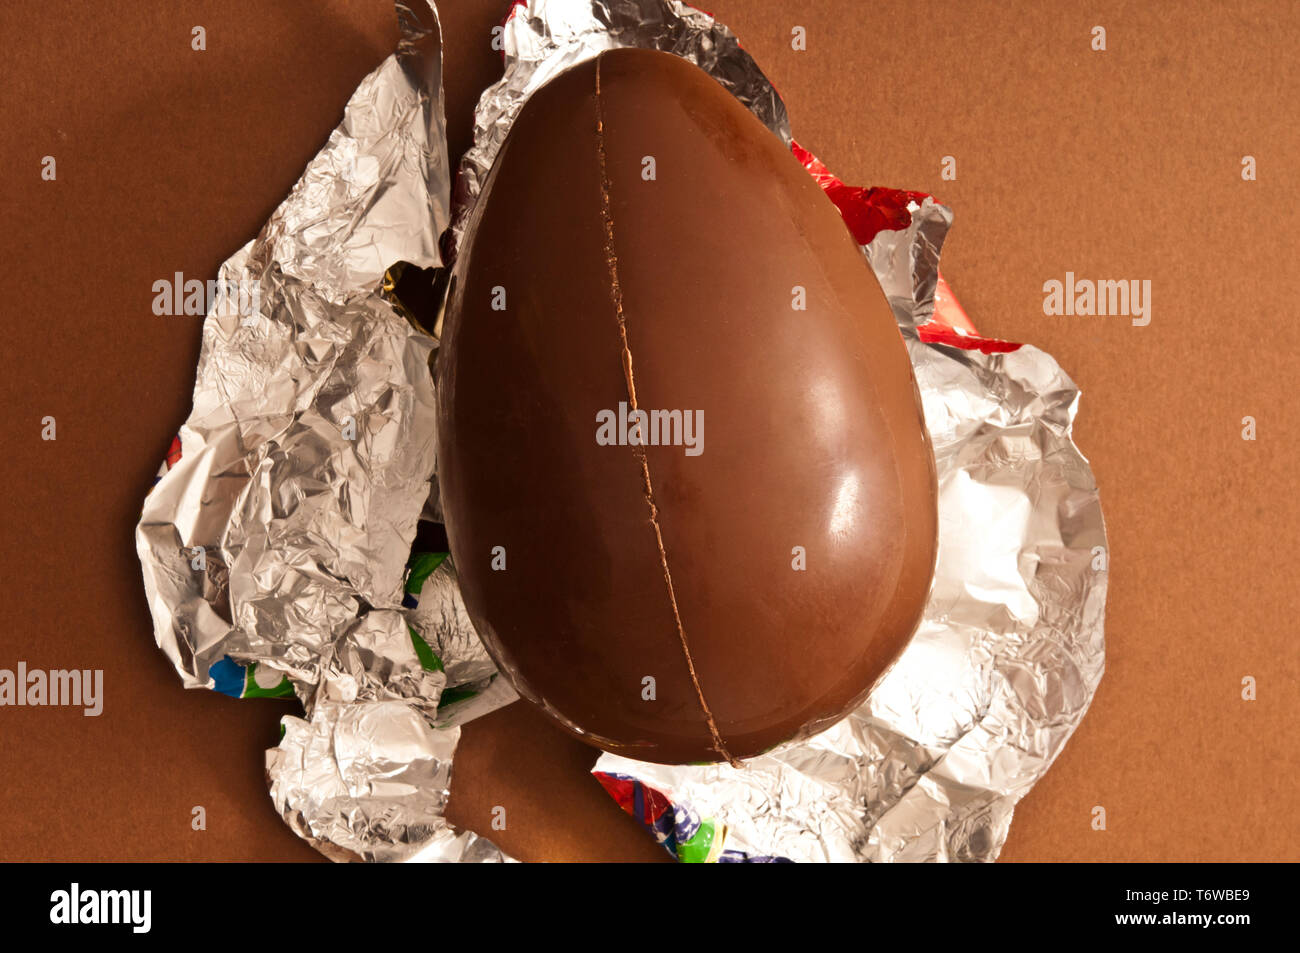 Easter traditional chocolate egg unwrapped Stock Photo